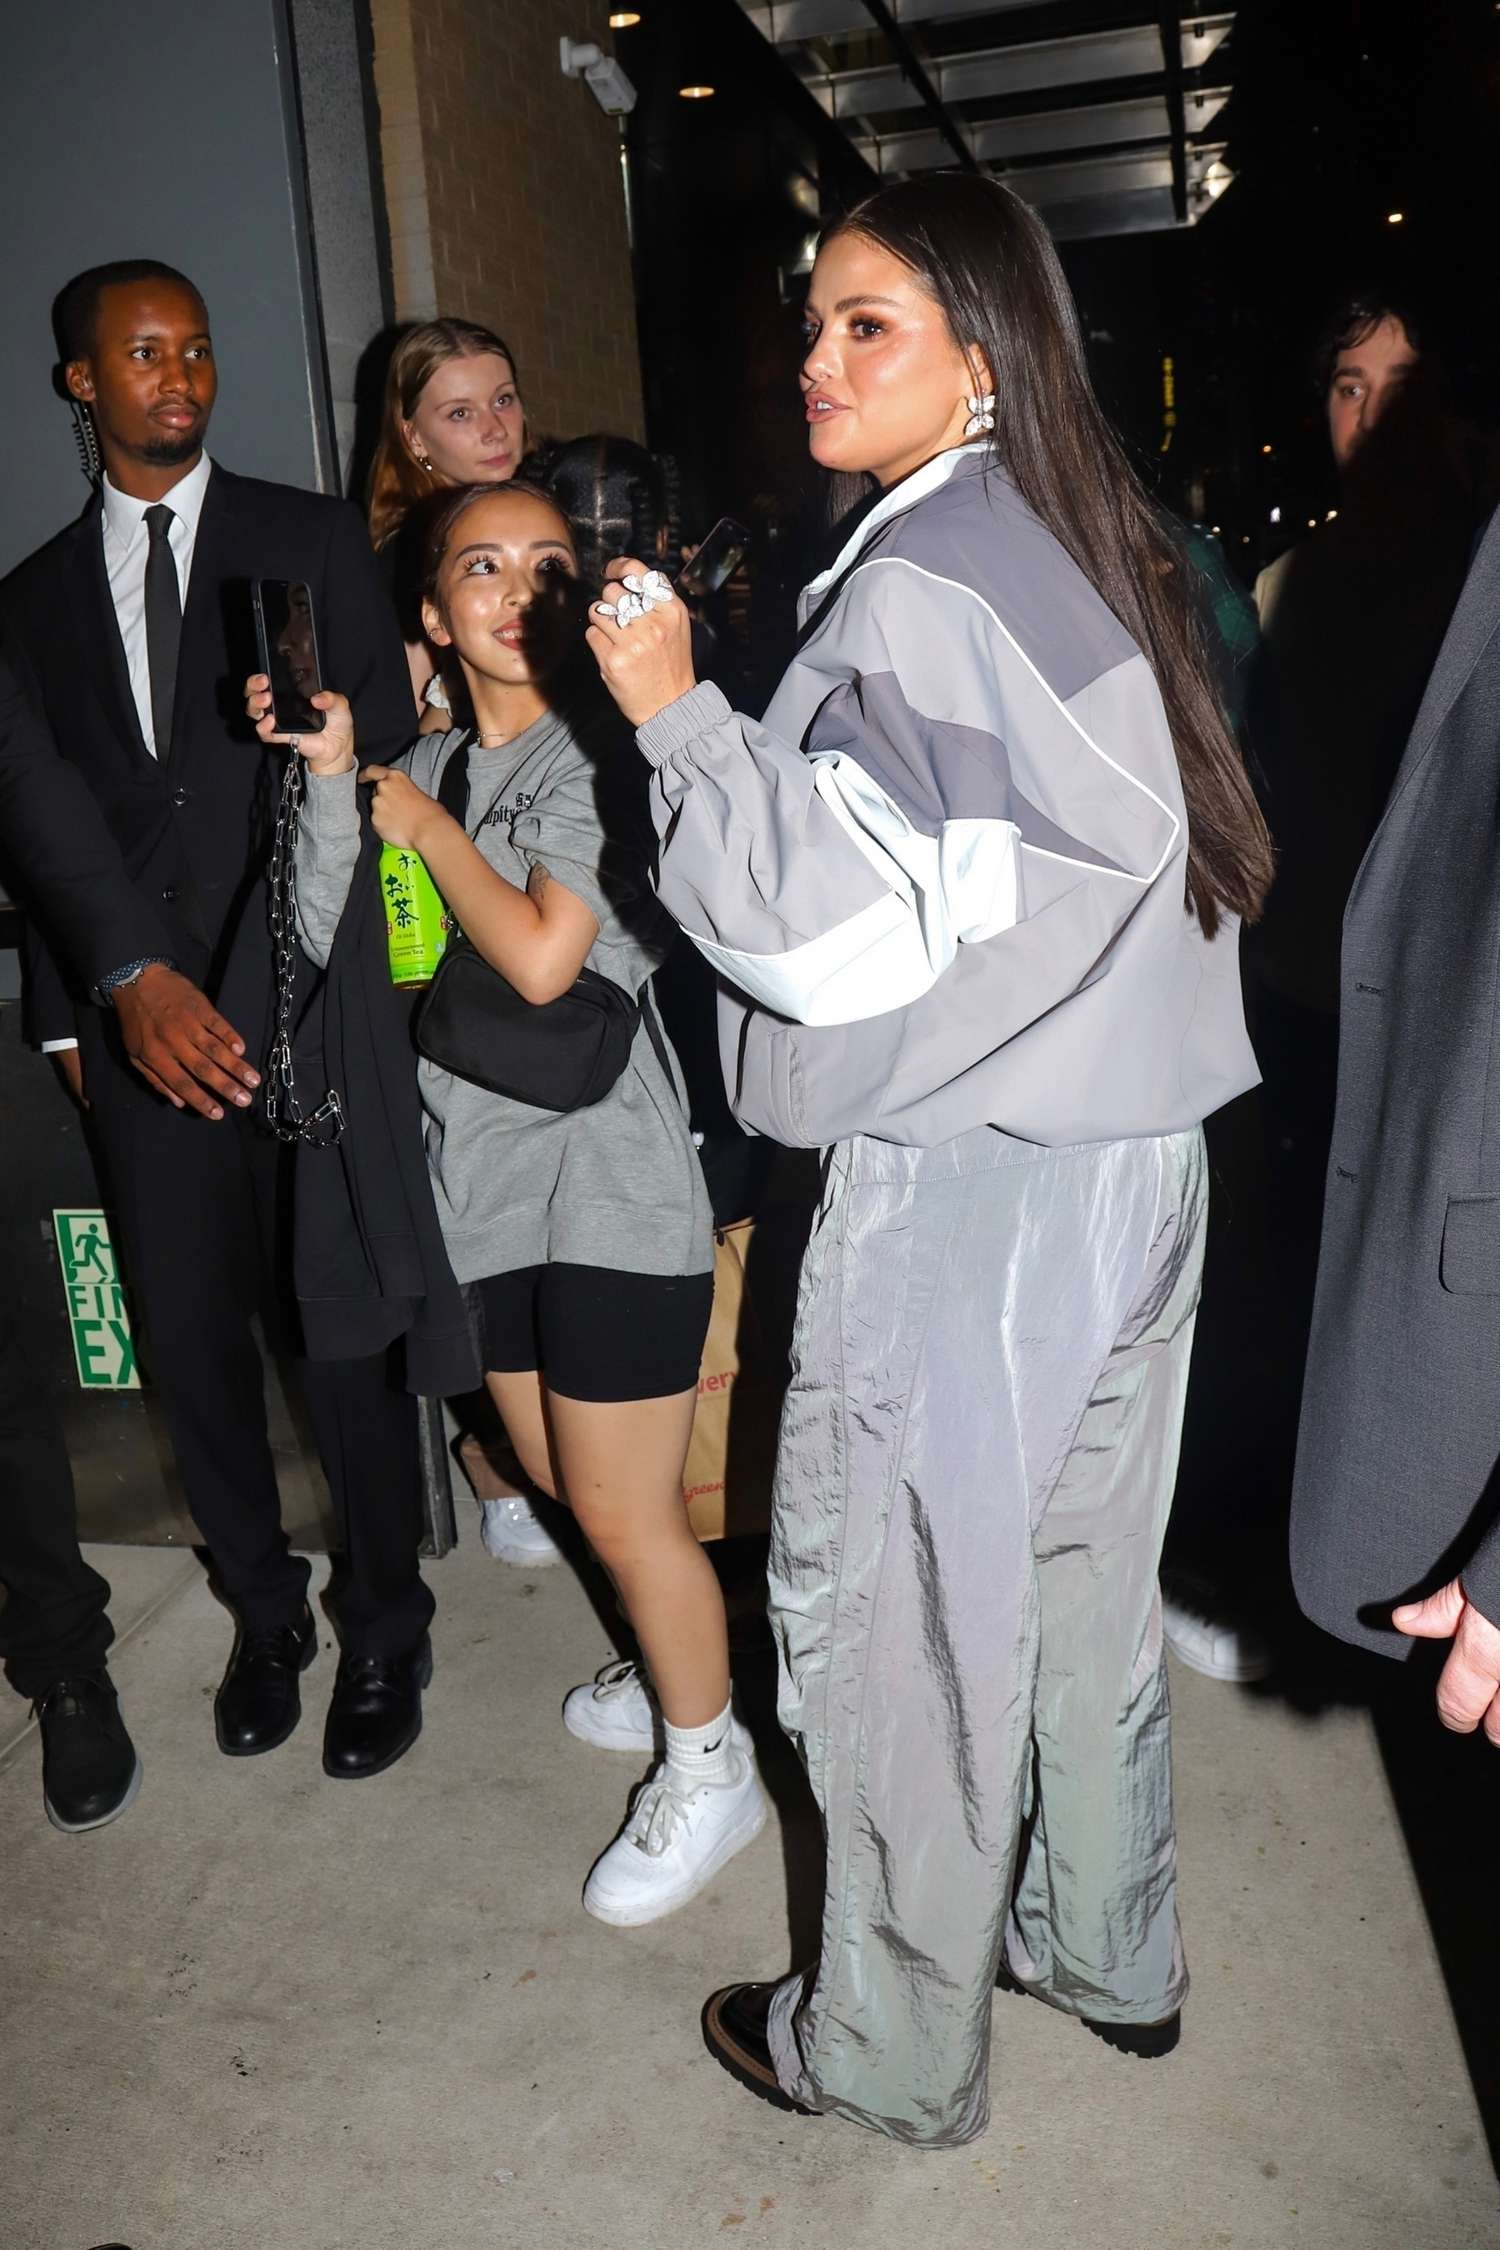 Selena_Gomez_-_returns_to_her_hotel_after_the_VMA_s_in_New_York2C_0912202306.jpg